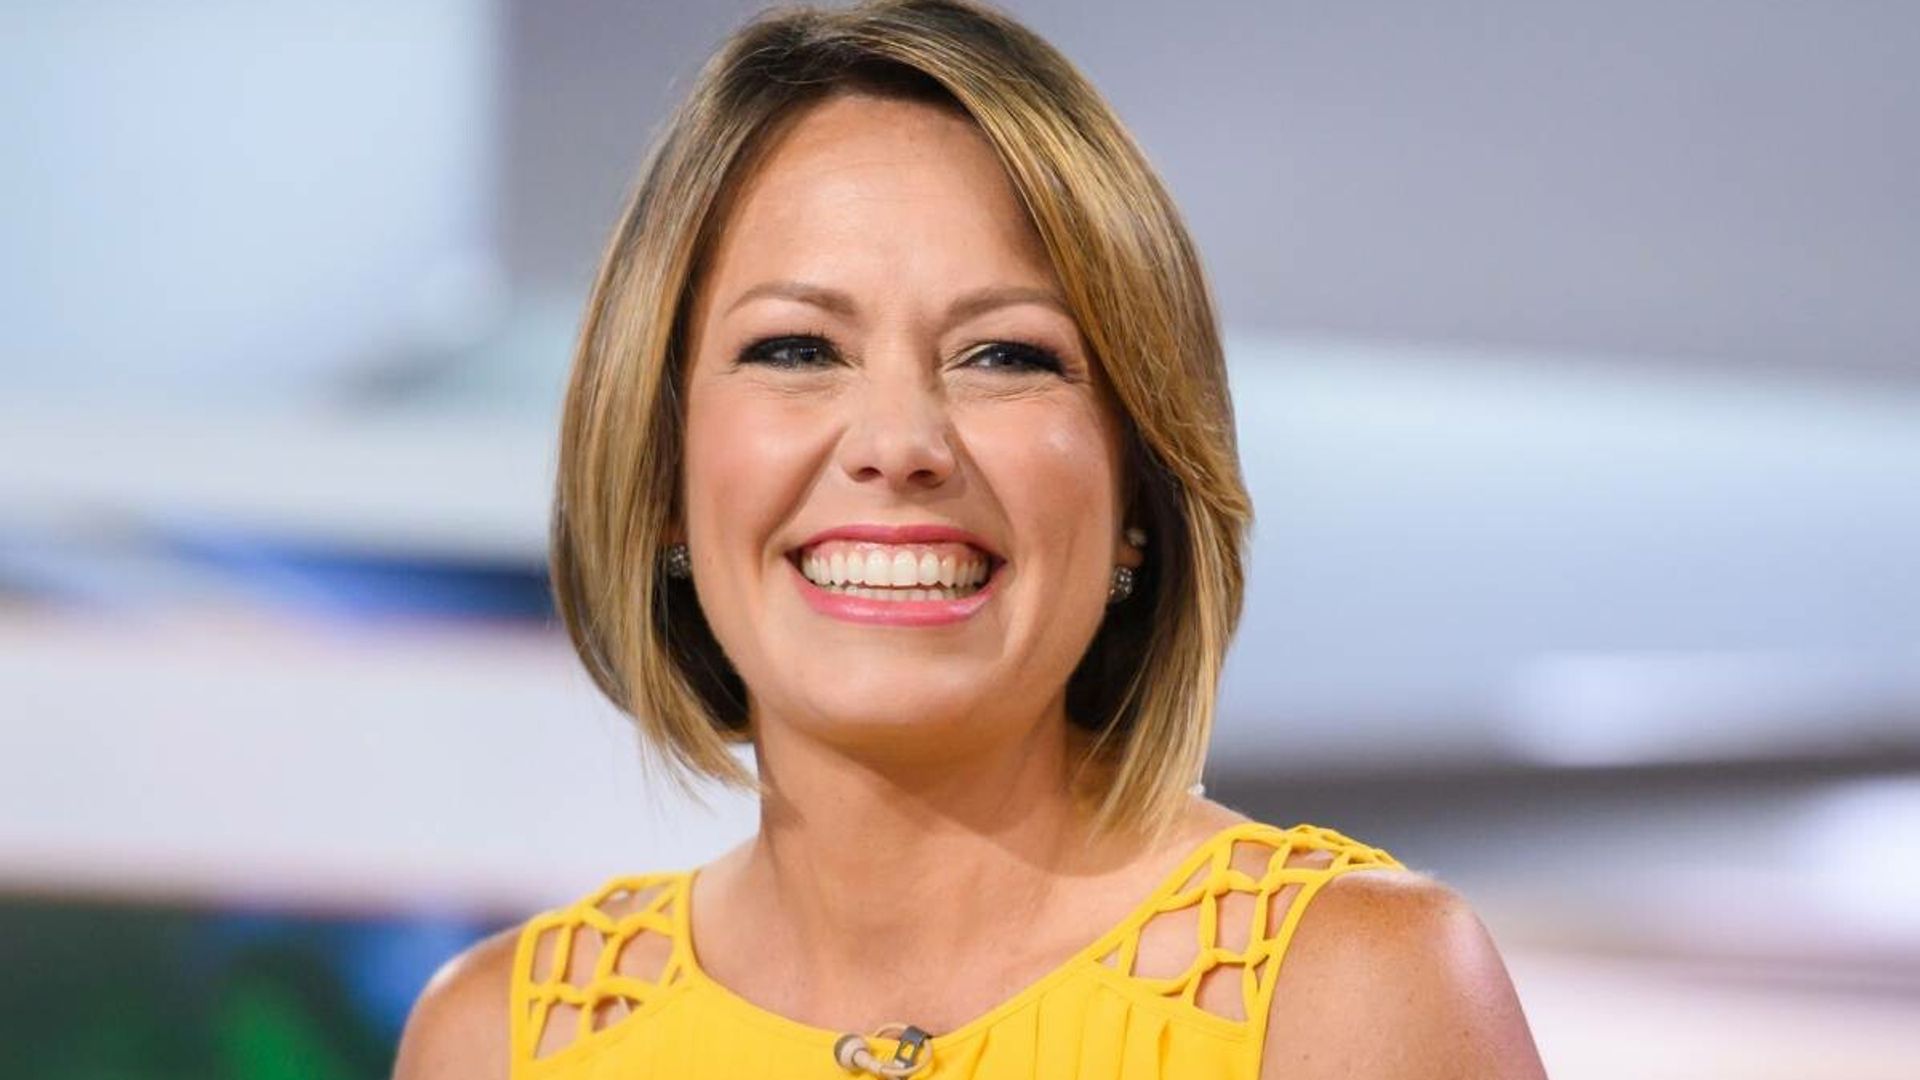 Dylan Dreyer reveals bombshell hair transformation ahead of return to